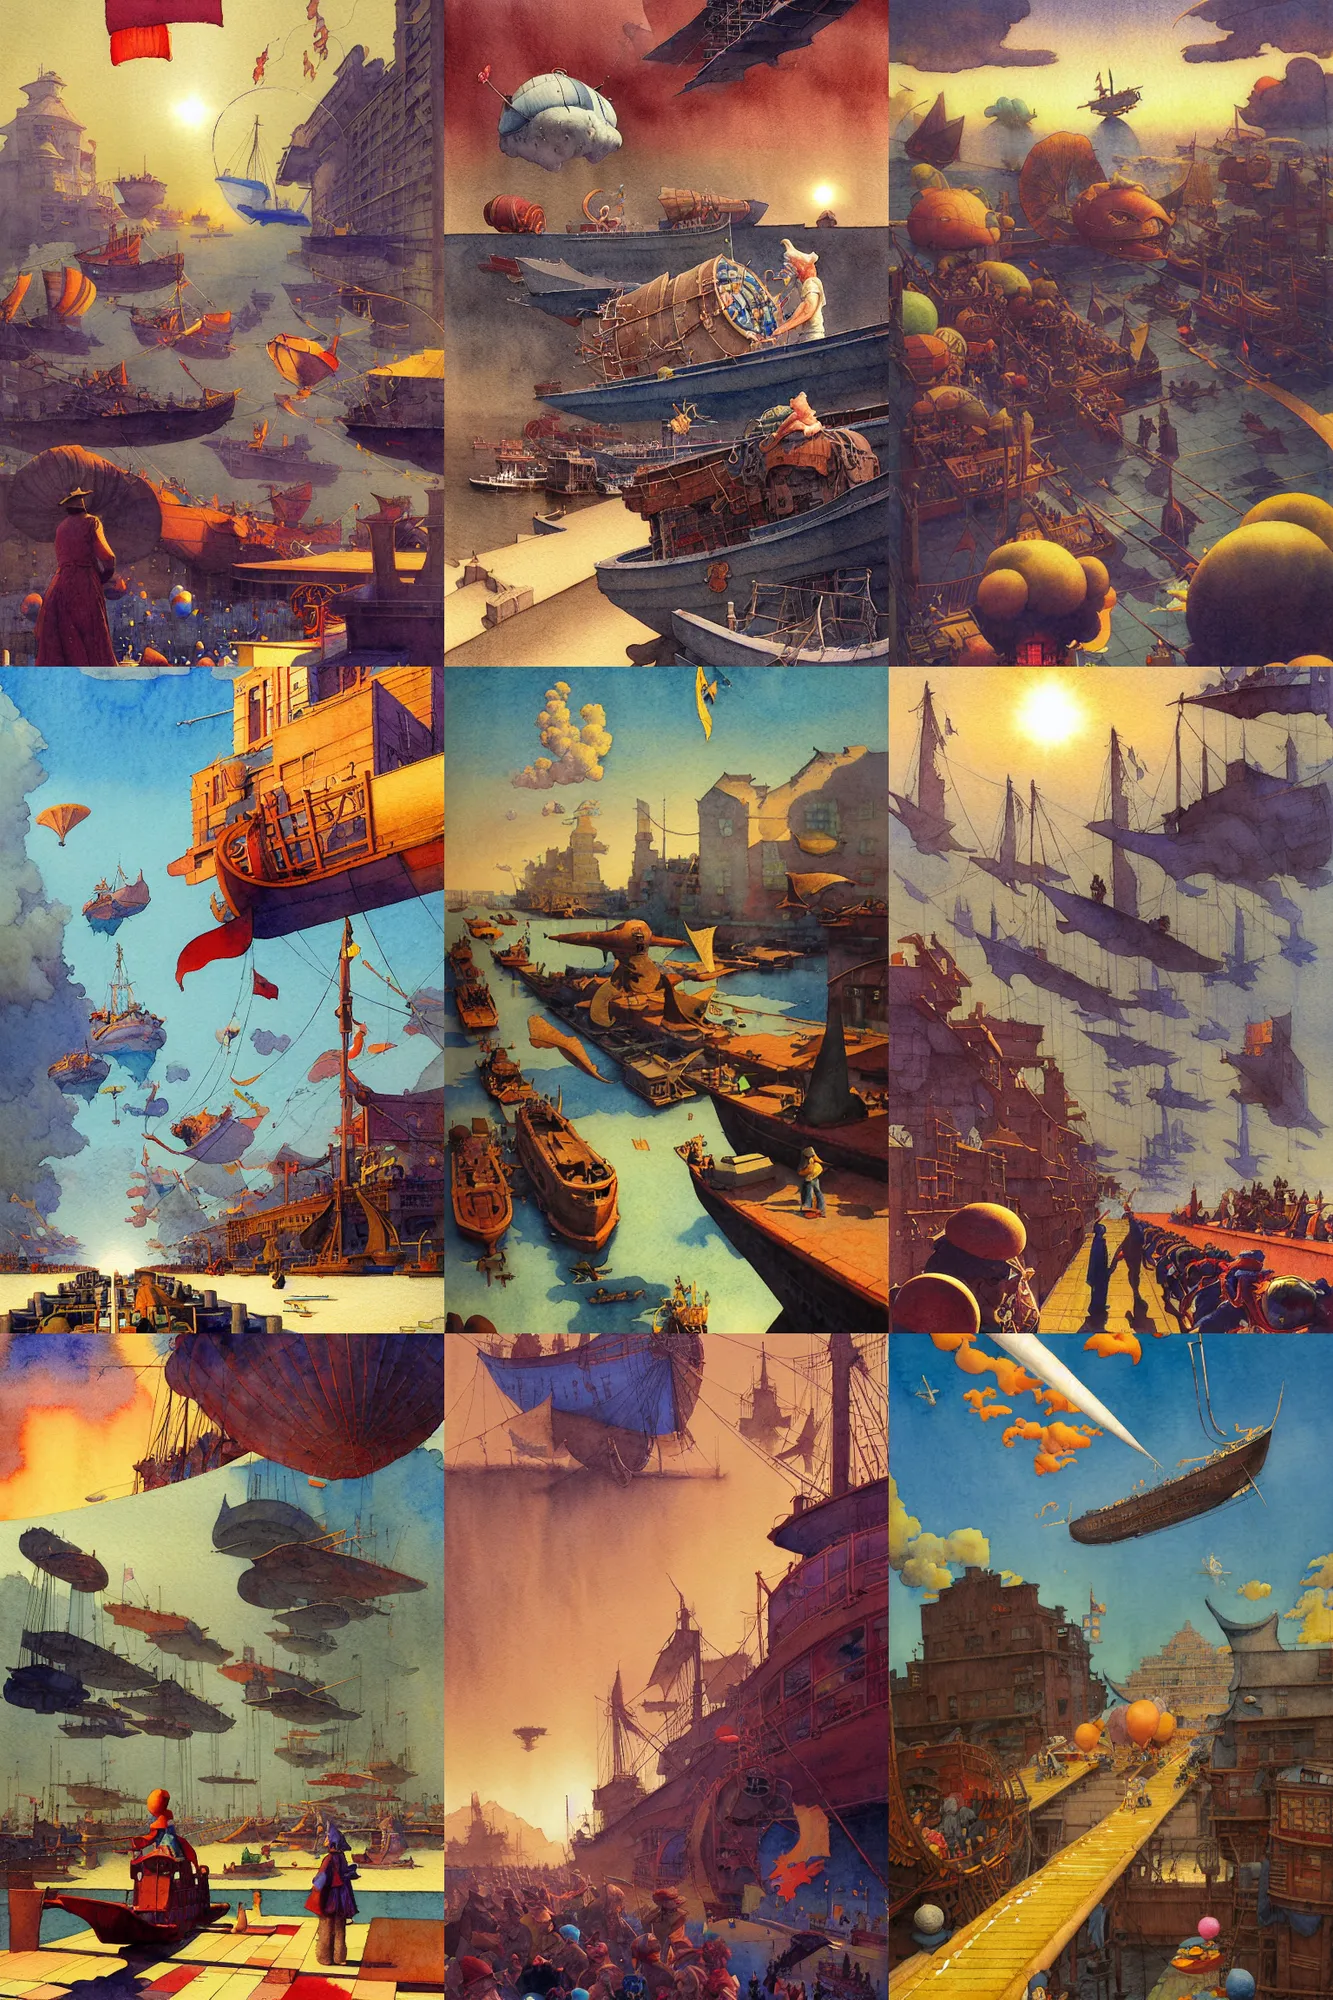 Prompt: dixit card, vanishing point, docks, airships, banners, parade, skypirate, porko rosso, foreground watcher, intricate, amazing composition, colorful watercolor, by ruan jia, by maxfield parrish, by shaun tan, by nc wyeth, by michael whelan, by escher, illustration, volumetric, bloom, sun puddle